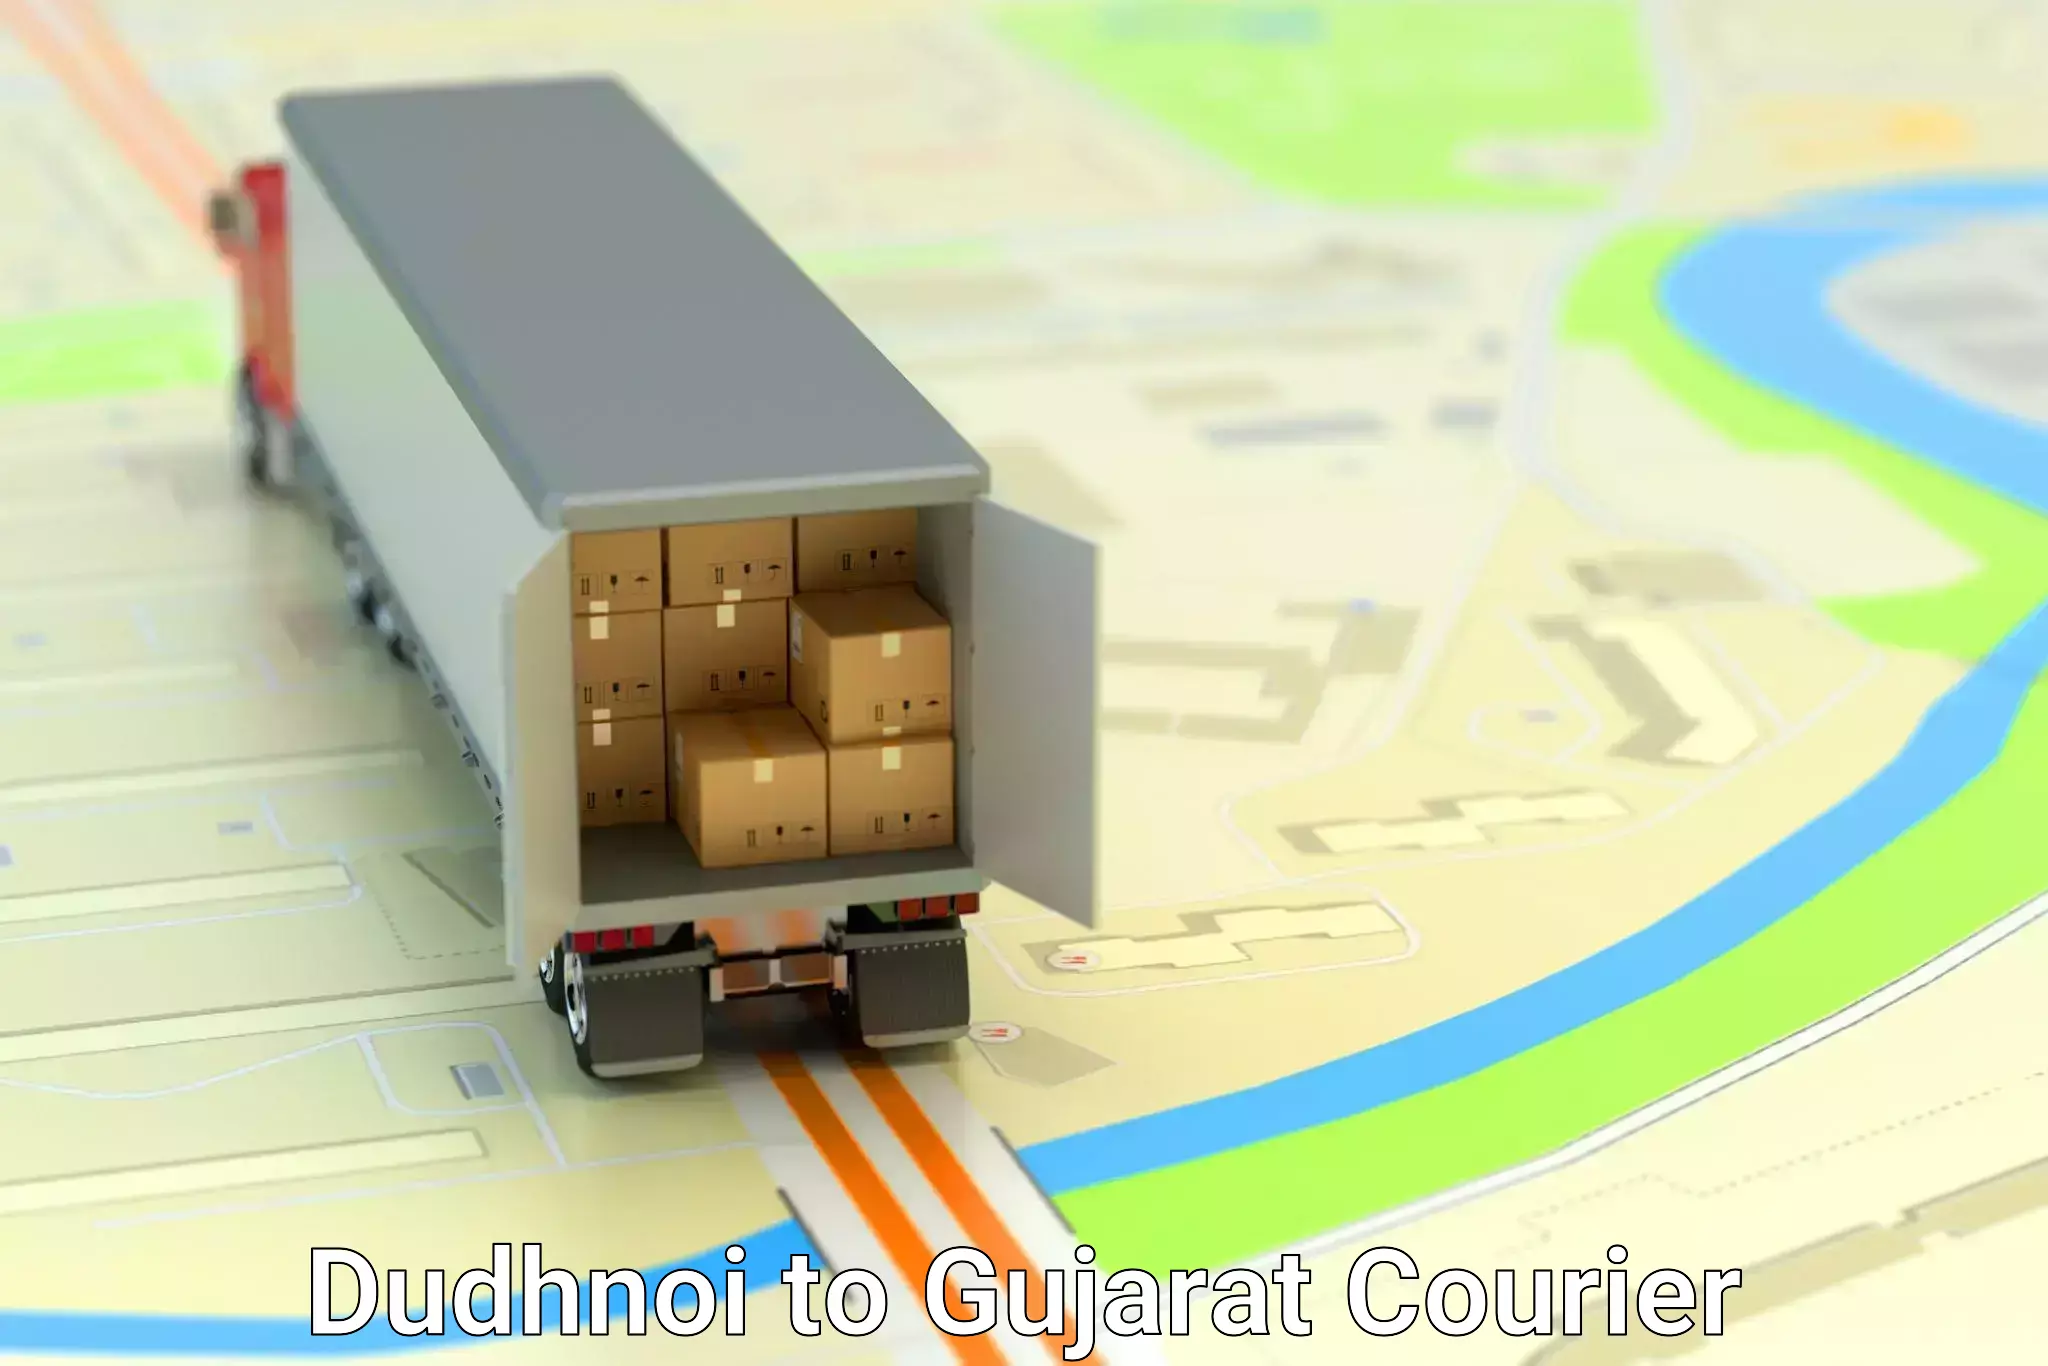 On-demand shipping options Dudhnoi to Hansot